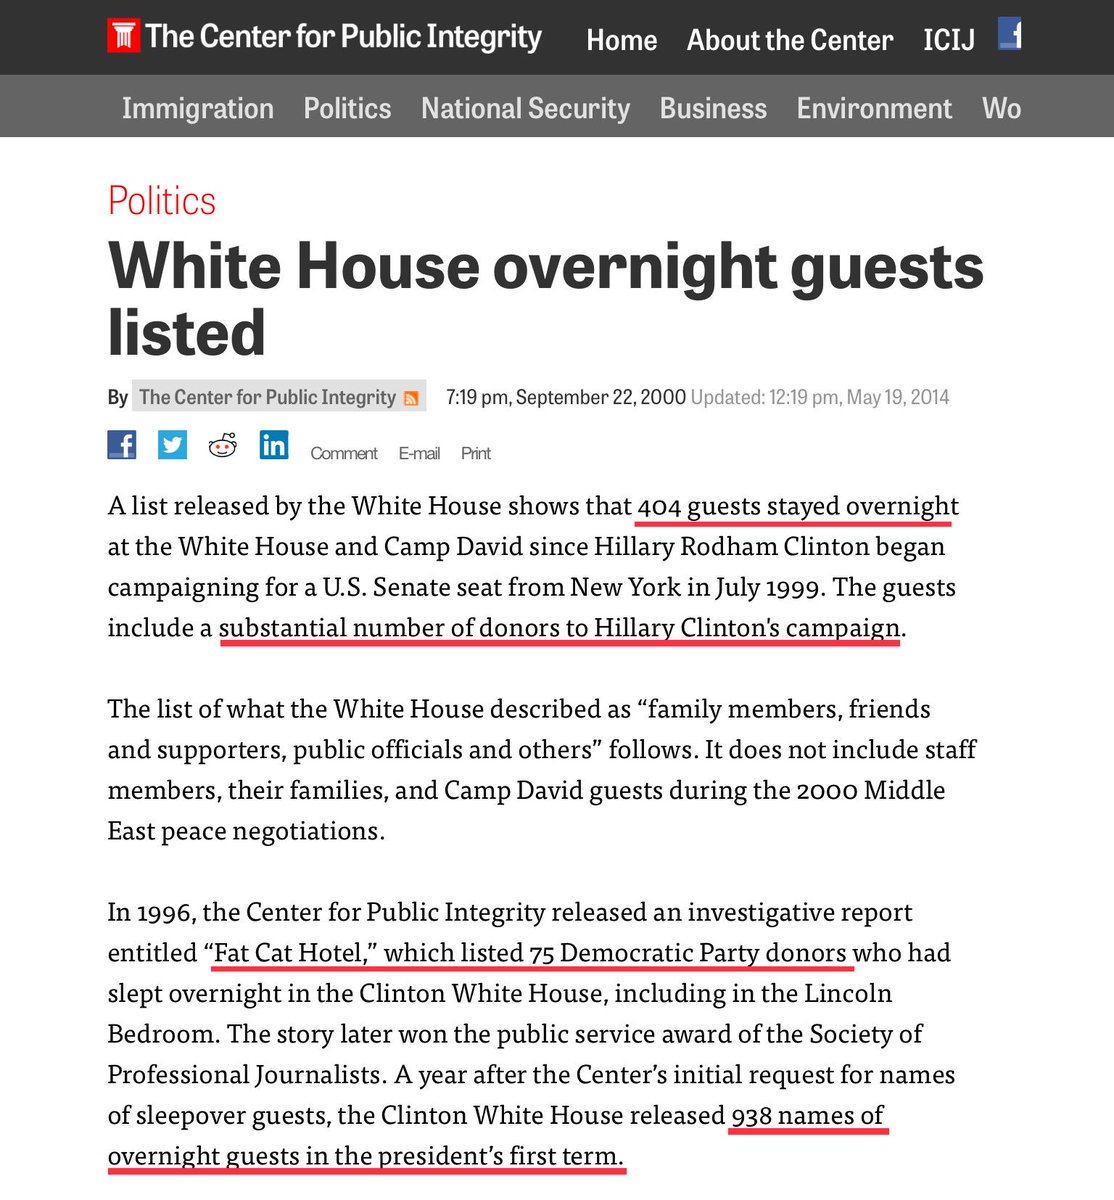  https://www.publicintegrity.org/2000/09/22/3267/white-house-overnight-guests-listedHockersmith had also enjoyed a night at the White House, according to the Center for Public Integrity. #FatCatHotel